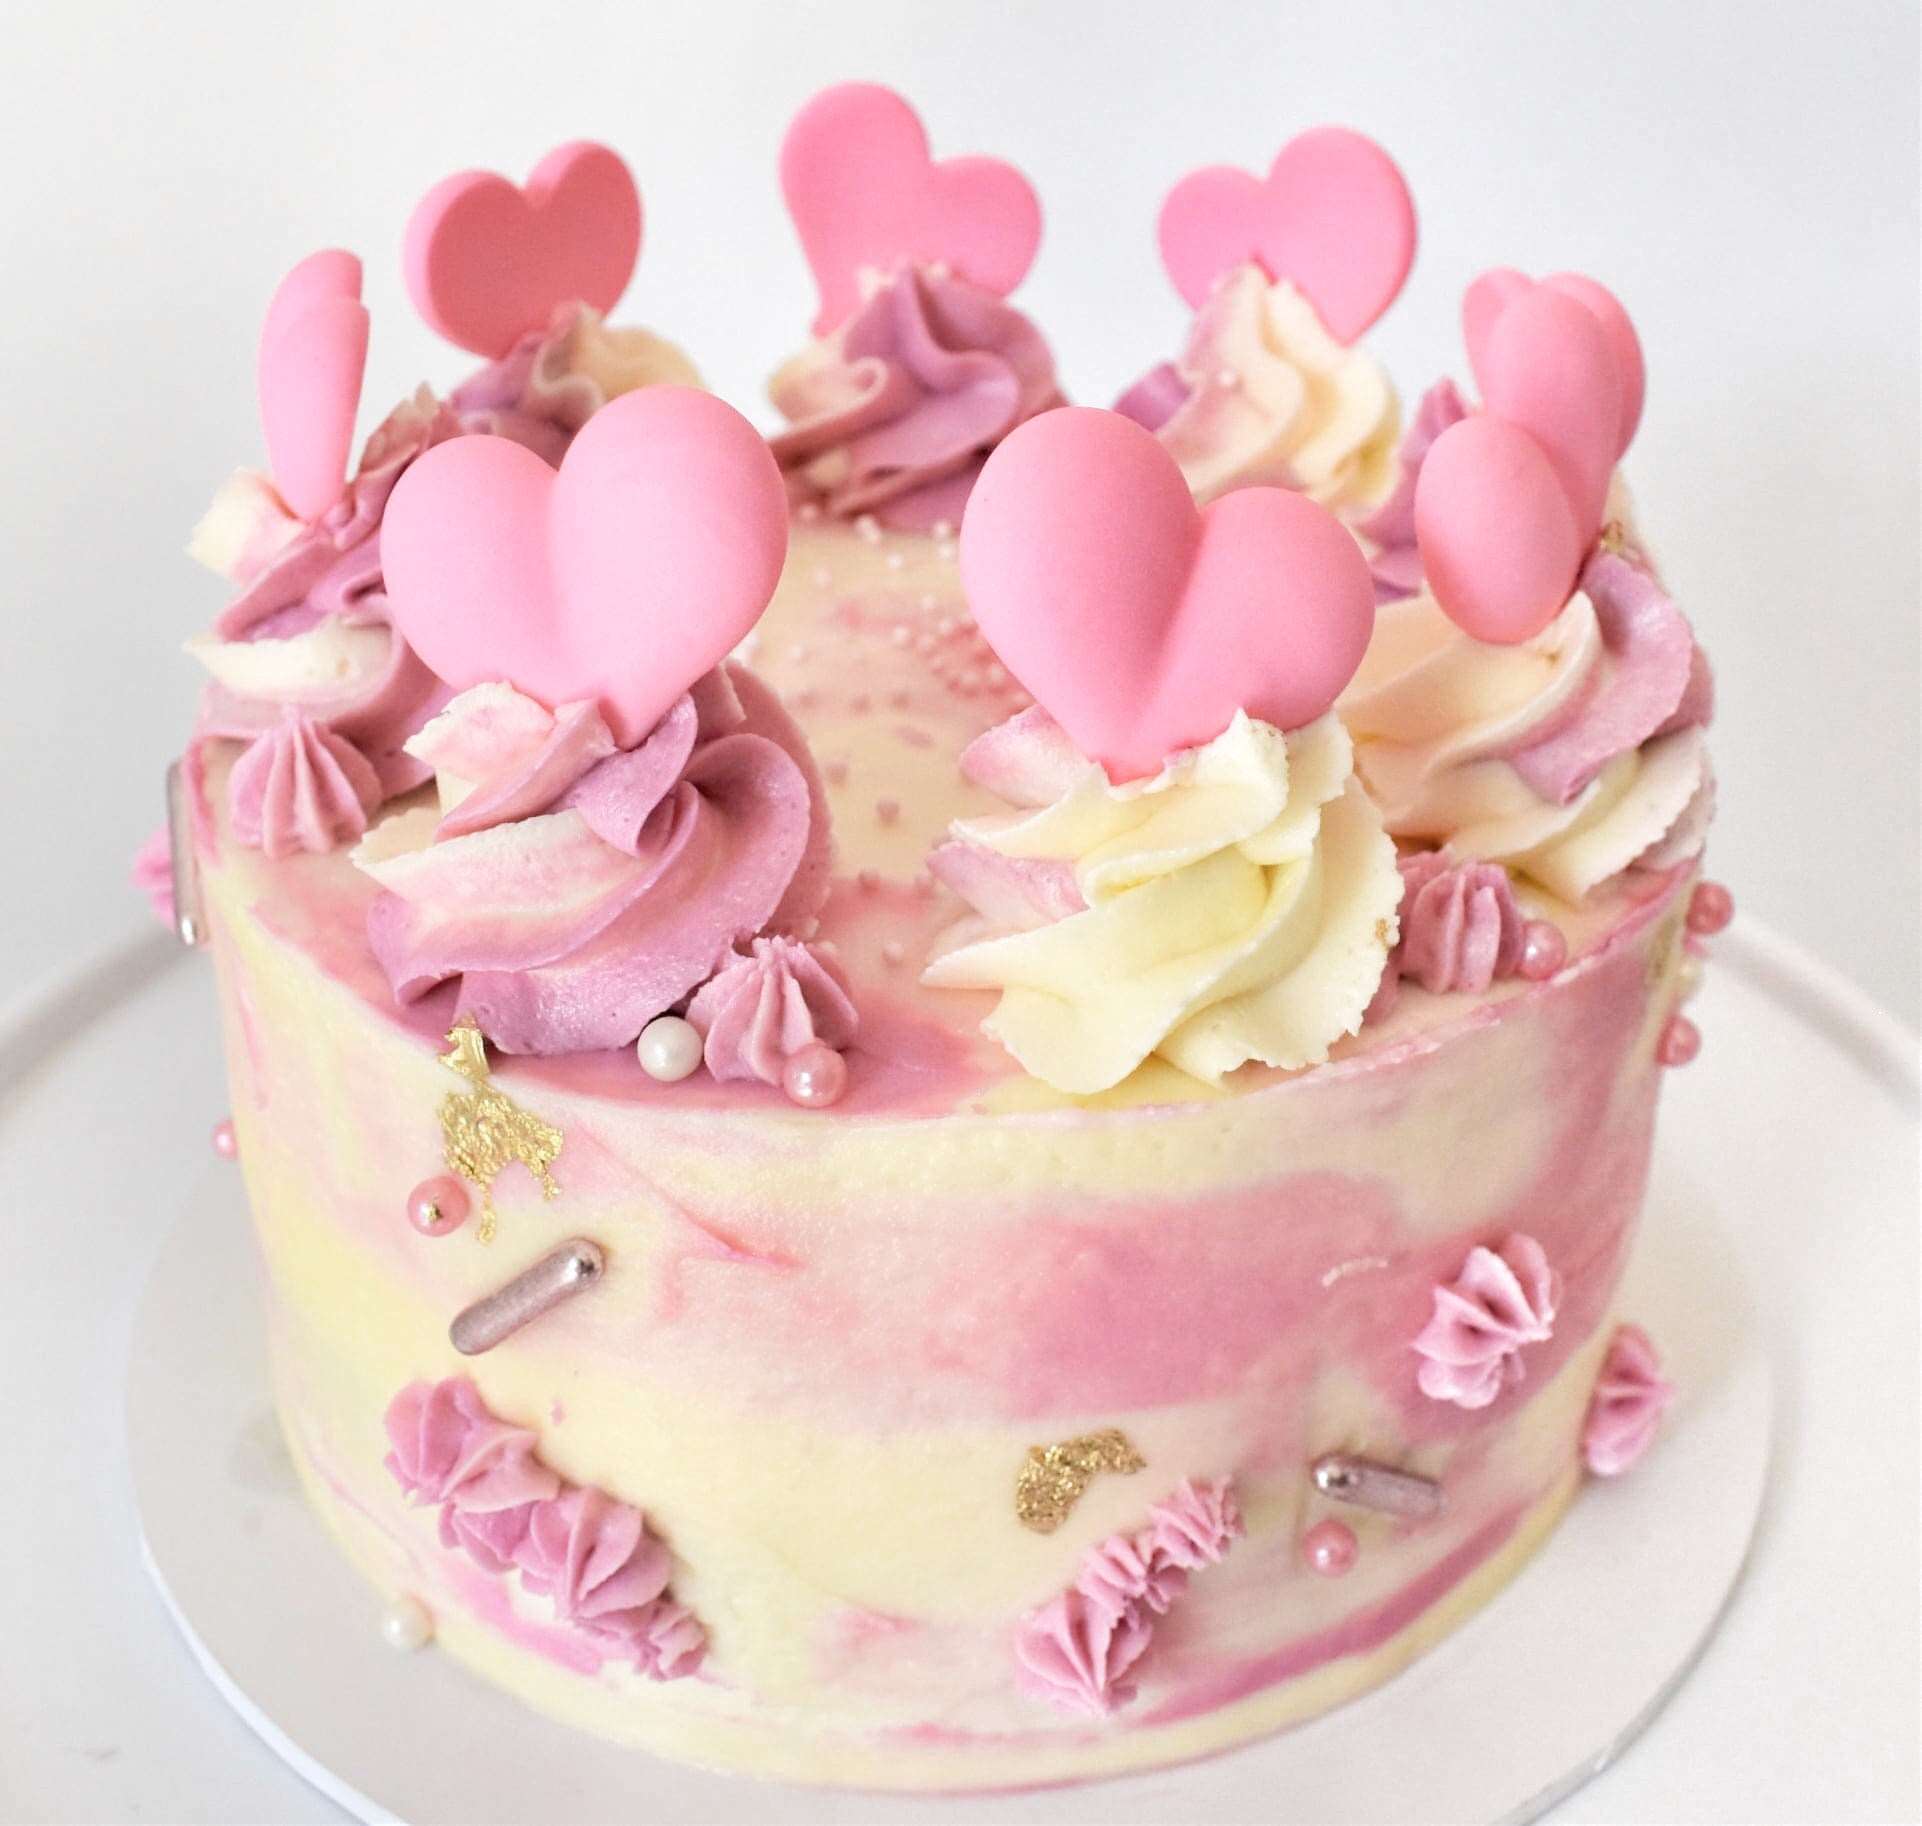 Clever Crumb Valentines Day DIY Cake Kit, Pink and White Cake, Love Heart Cake, Sprinkles, Buttercream Swirls